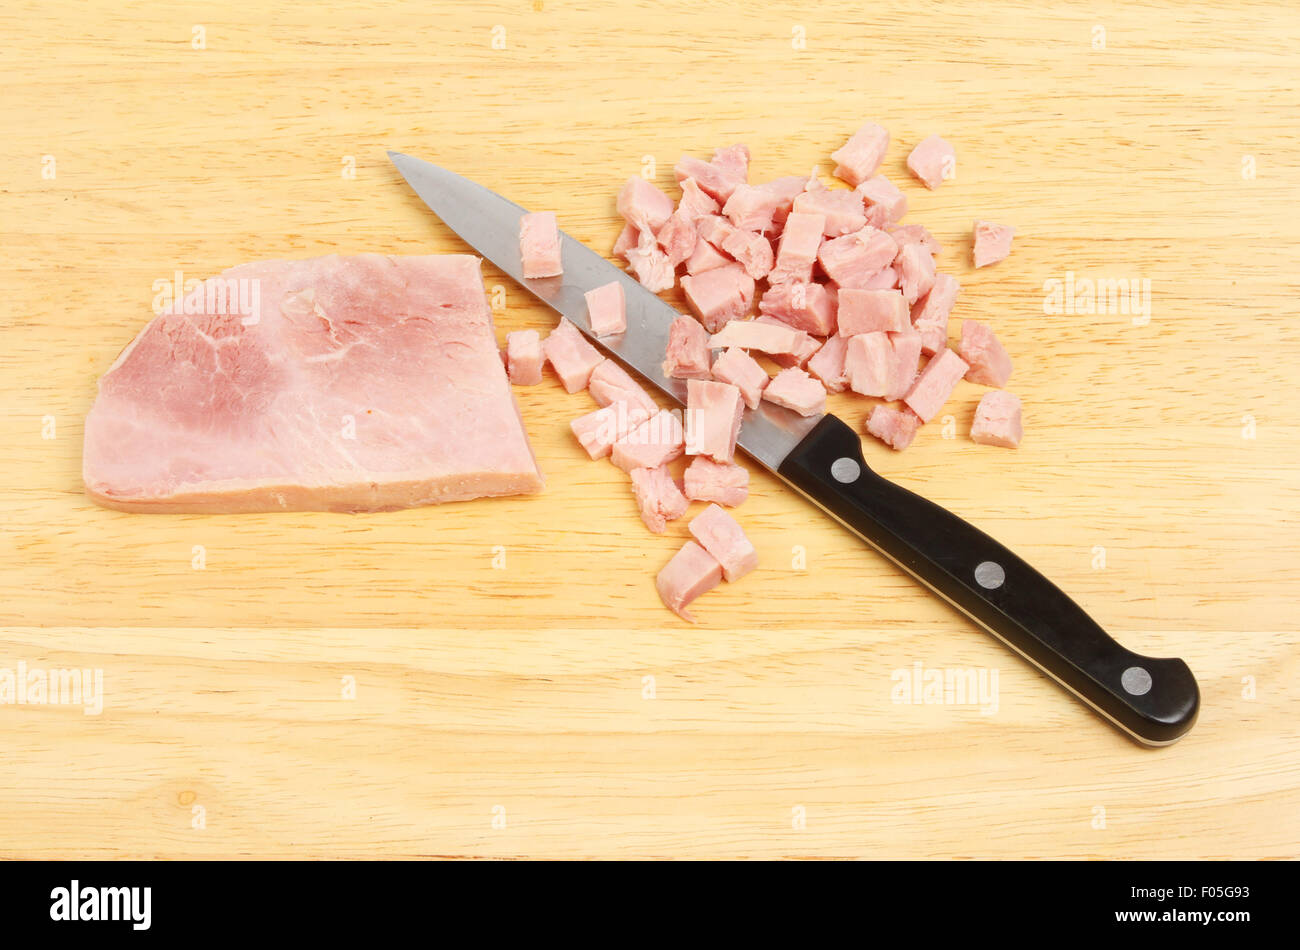 Chopped ham with a knife on a wooden board Stock Photo